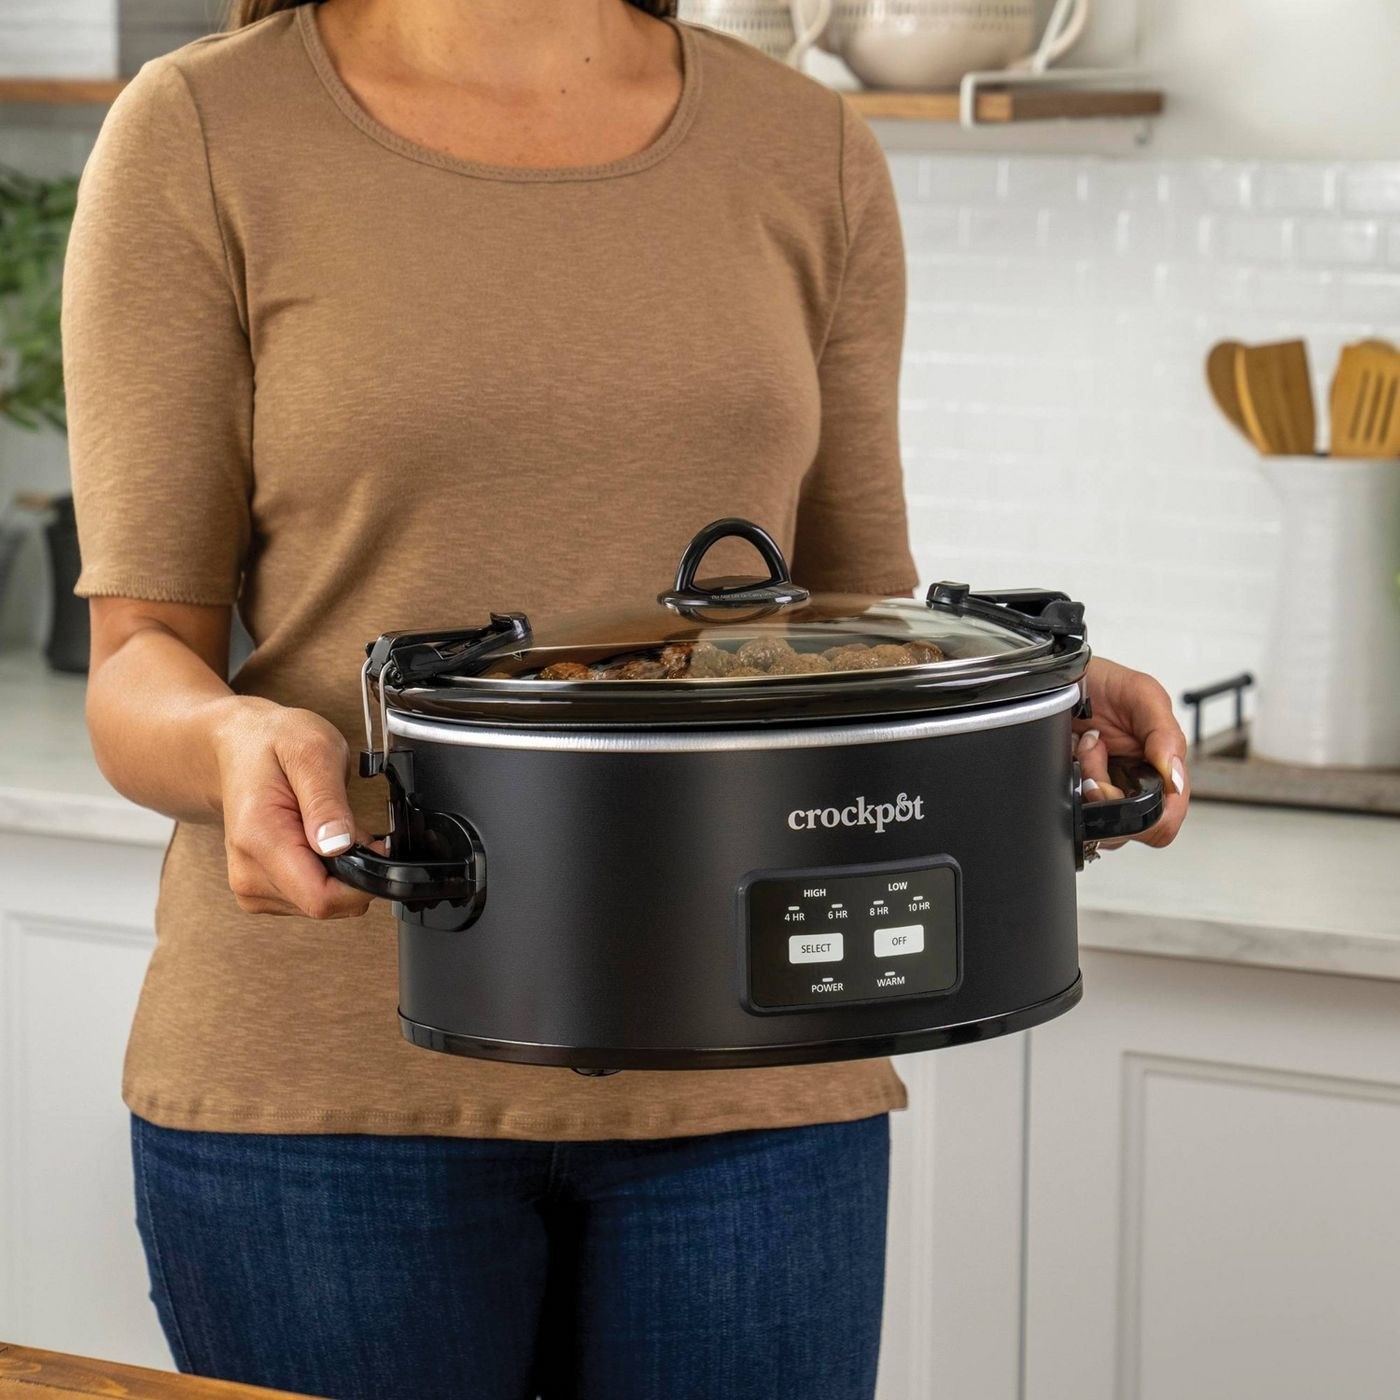 The Crock-pot, which has handles and special clamps to keep the lid in place while traveling